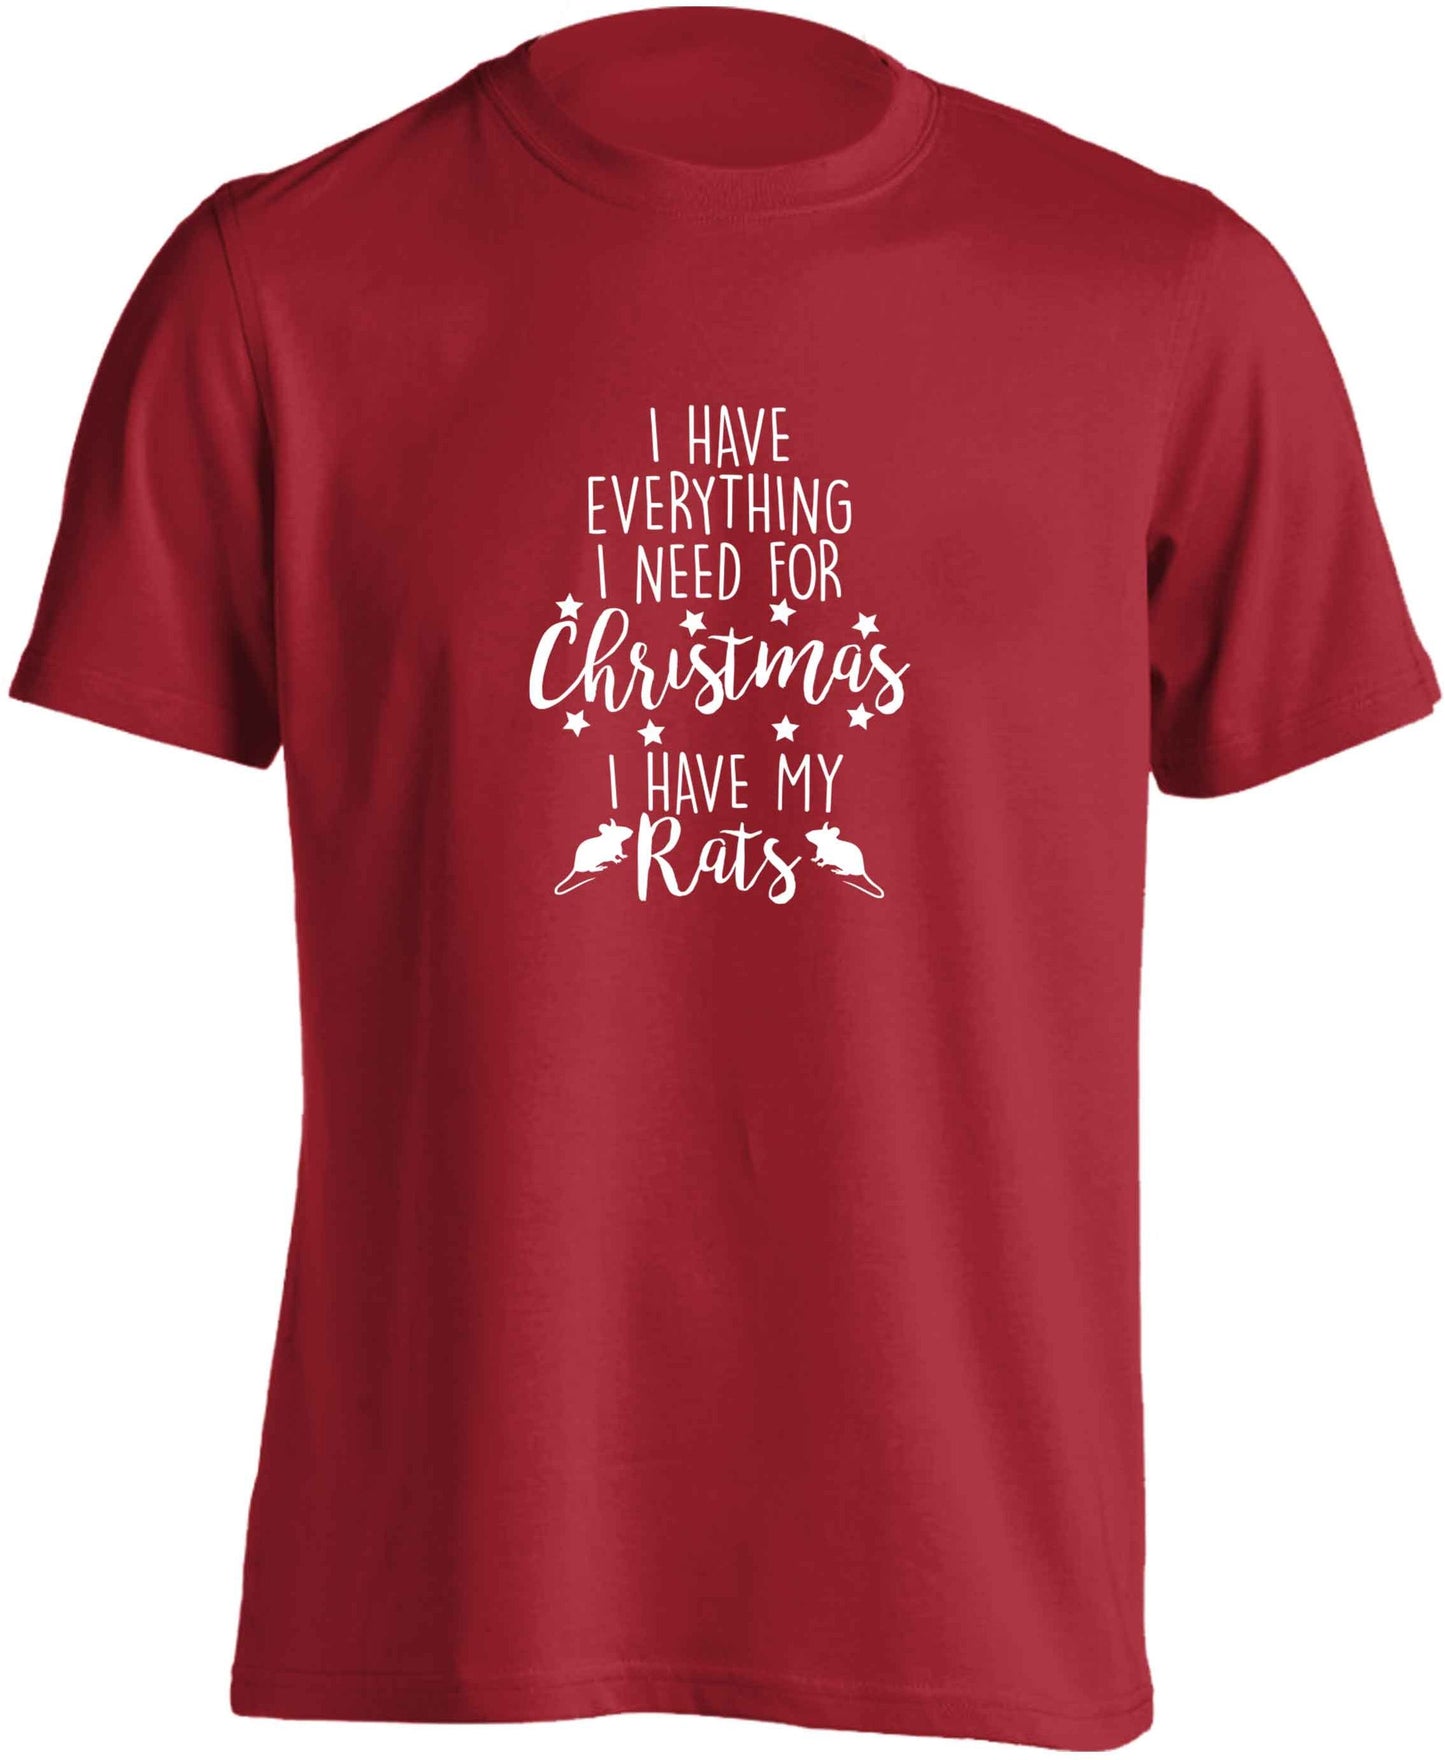 I have everything I need for Christmas I have my rats adults unisex red Tshirt 2XL